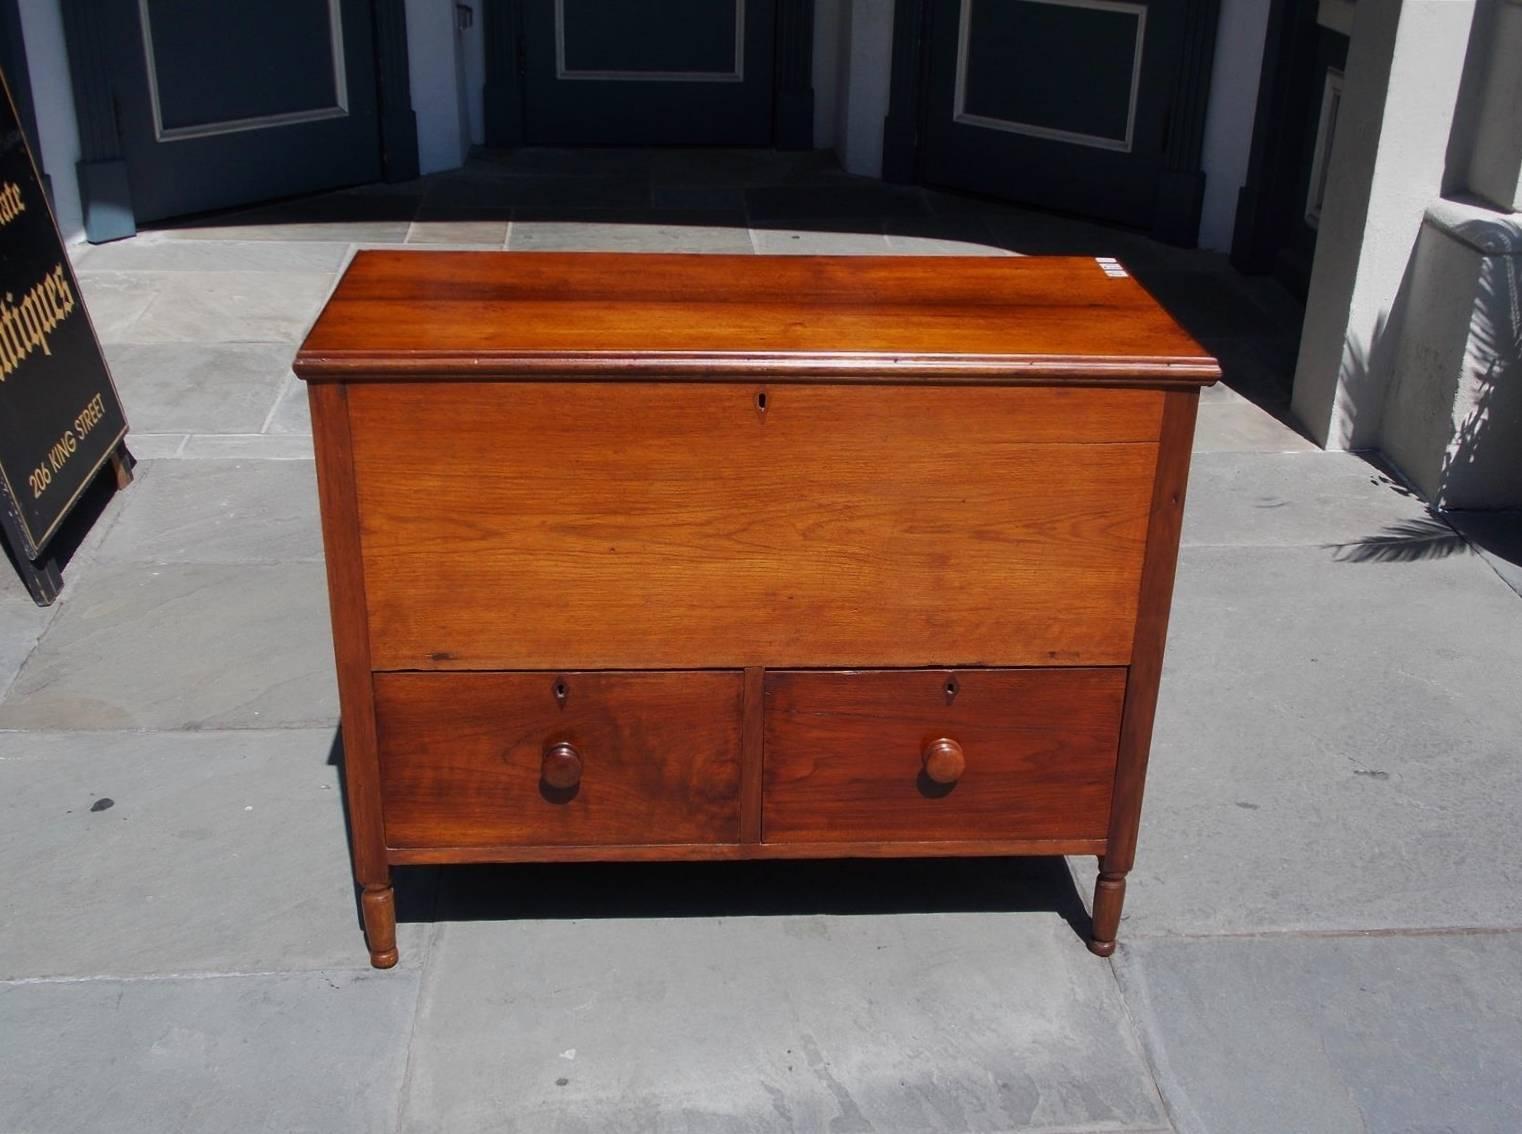 American walnut hinged top sugar chest with compartmentalized interior, two lower case drawers with the original wooden knobs, and resting on the original turned bulbous legs, Early 19th century. Secondary wood consist of poplar and white